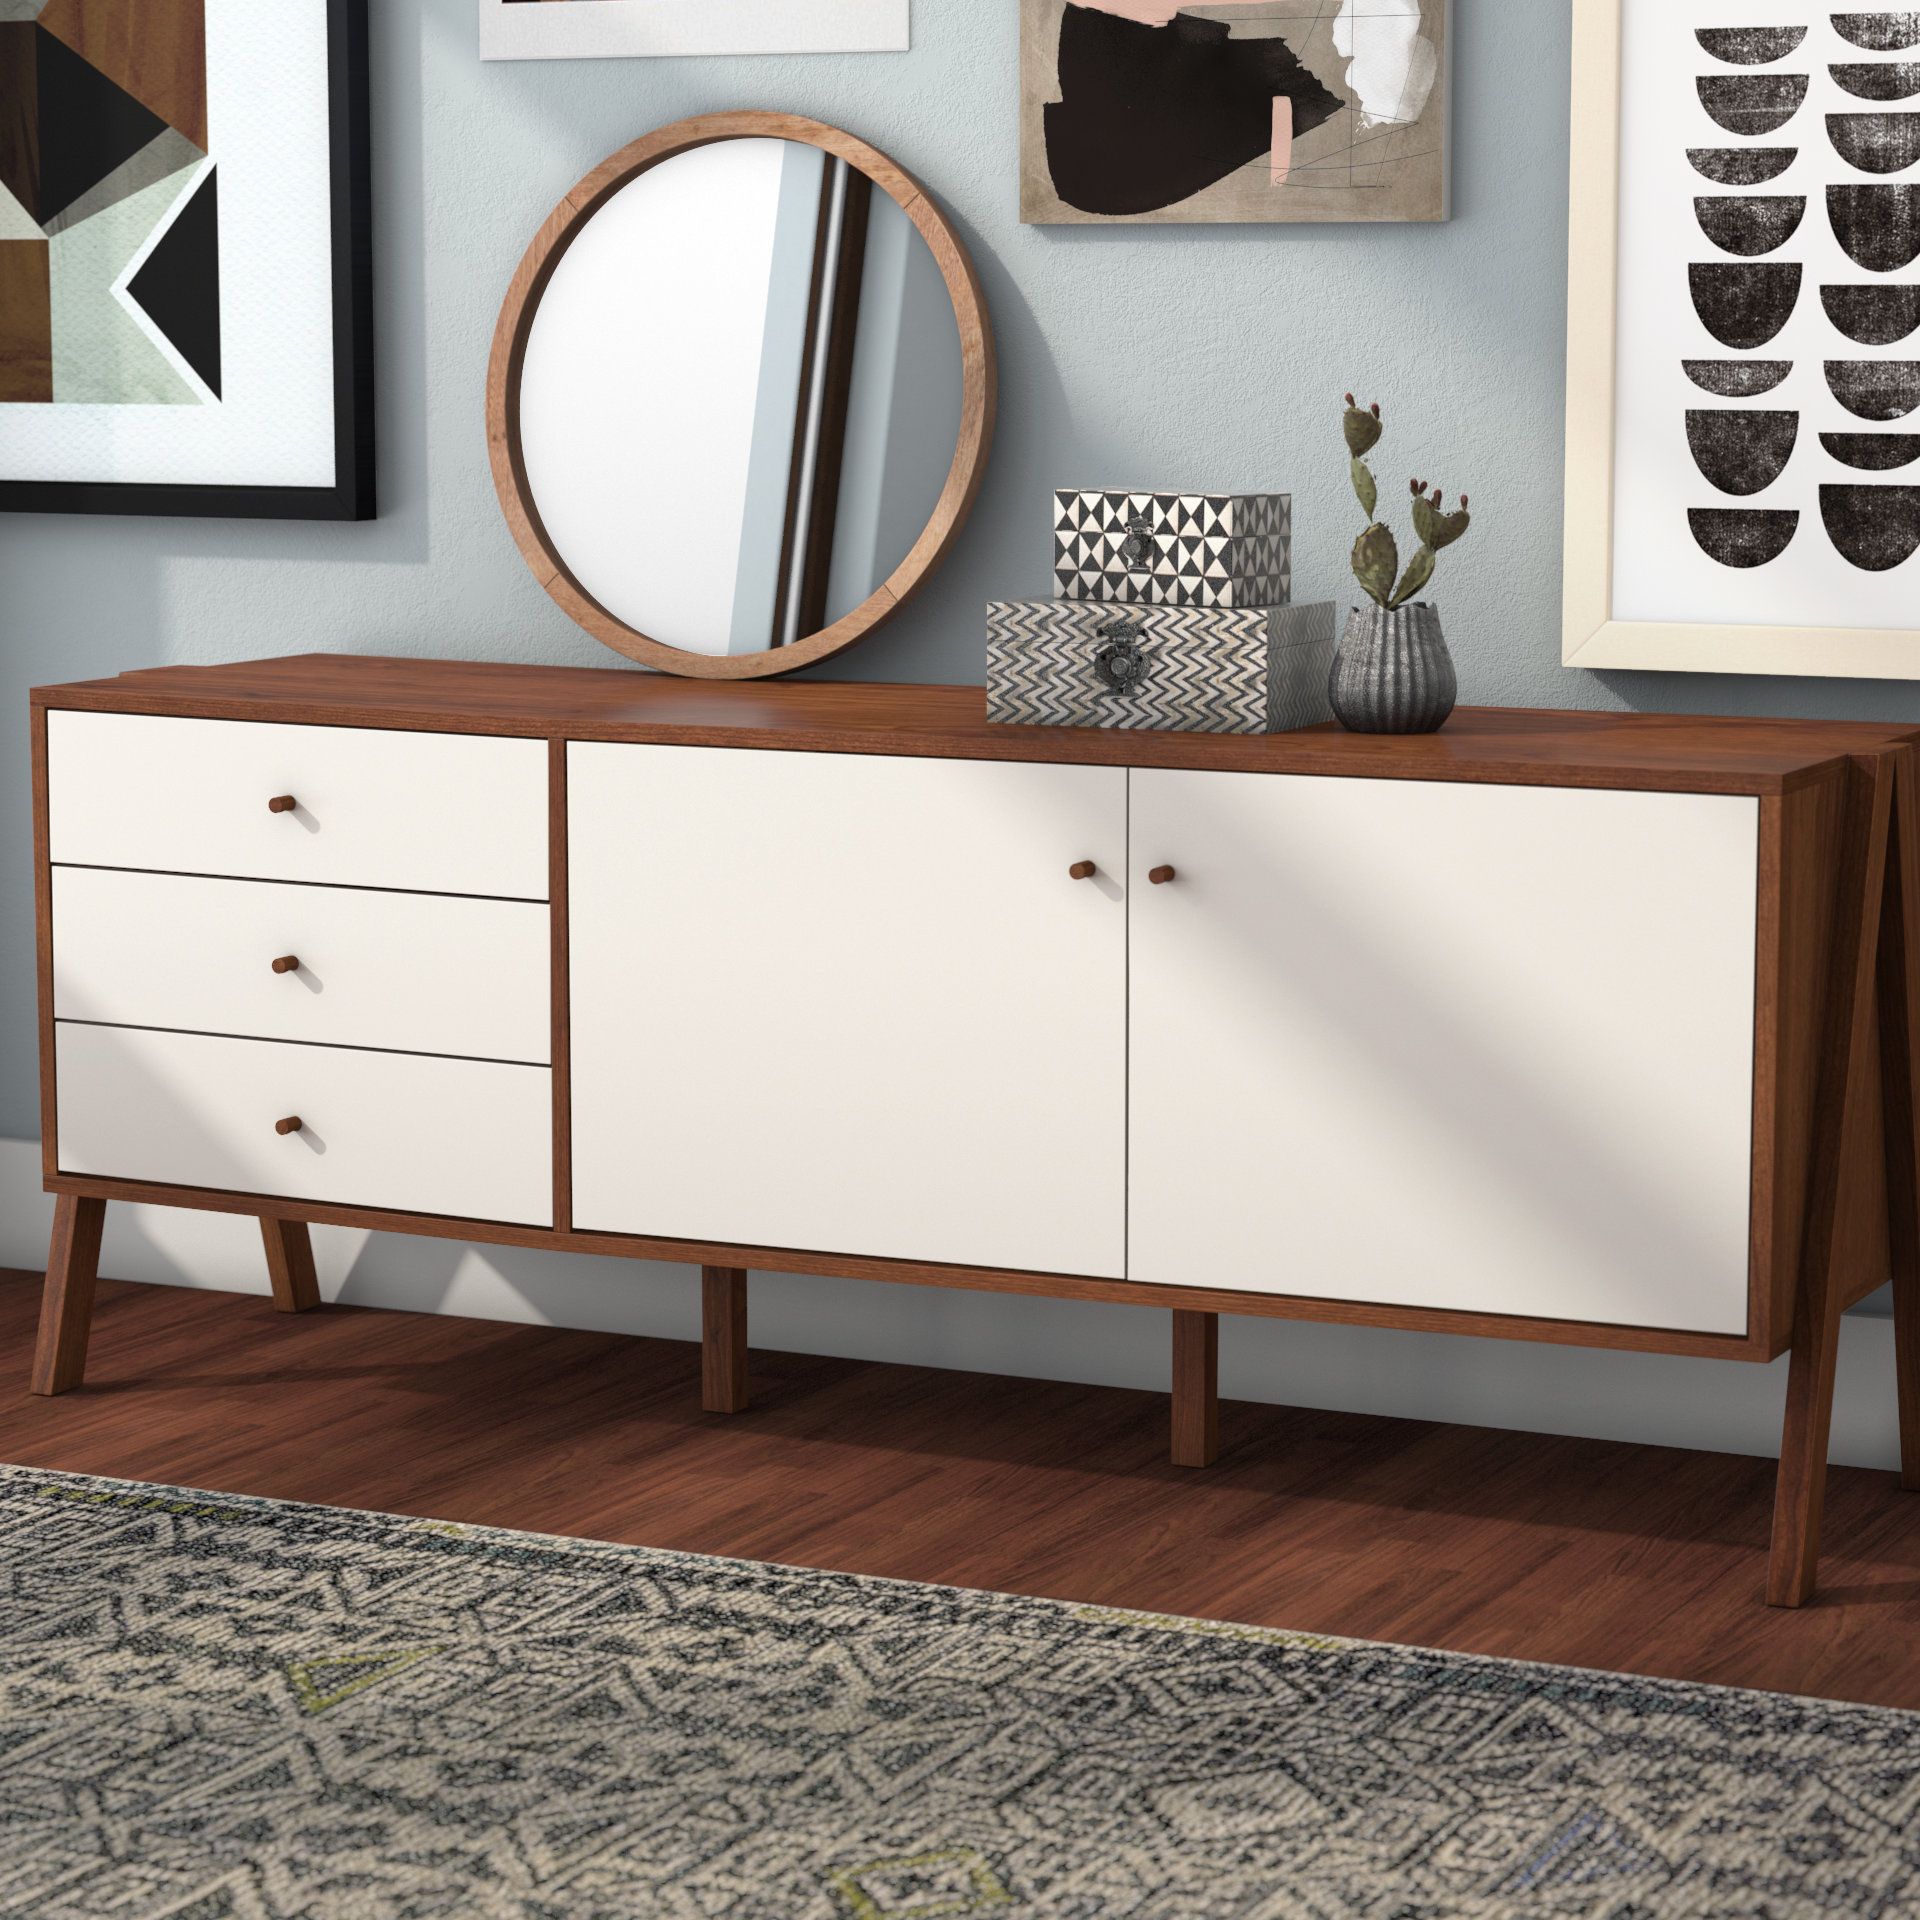 72 In Credenza | Wayfair Within Emerald Cubes Credenzas (View 27 of 30)